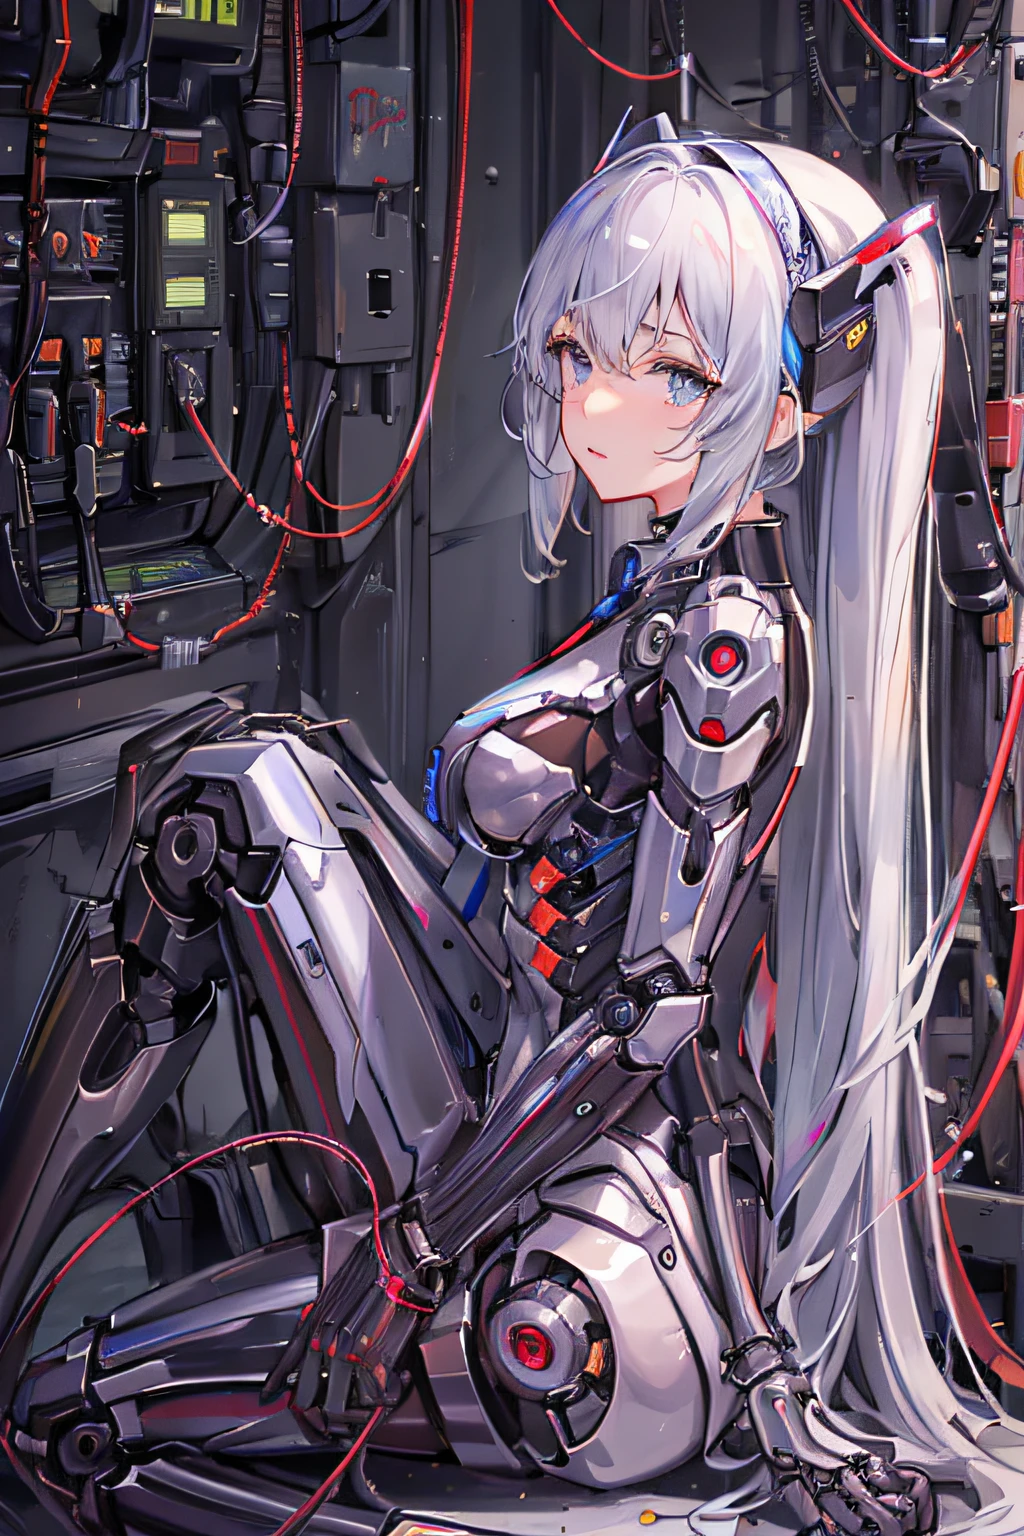 Anime 女孩 sitting on the ground with a robot in front of her, cyborg - 女孩 with silver hair, 生物力學歐派, Cute cyborg 女孩, Cyborg 女孩, beautiful 女孩 cyborg, 完美的動漫機器人女人, perfect android 女孩, 機器人 - 女孩, 動漫機器人, beutiful white 女孩 cyborg, 全機器人!! 女孩, Cyberpunk anime 女孩 mecha